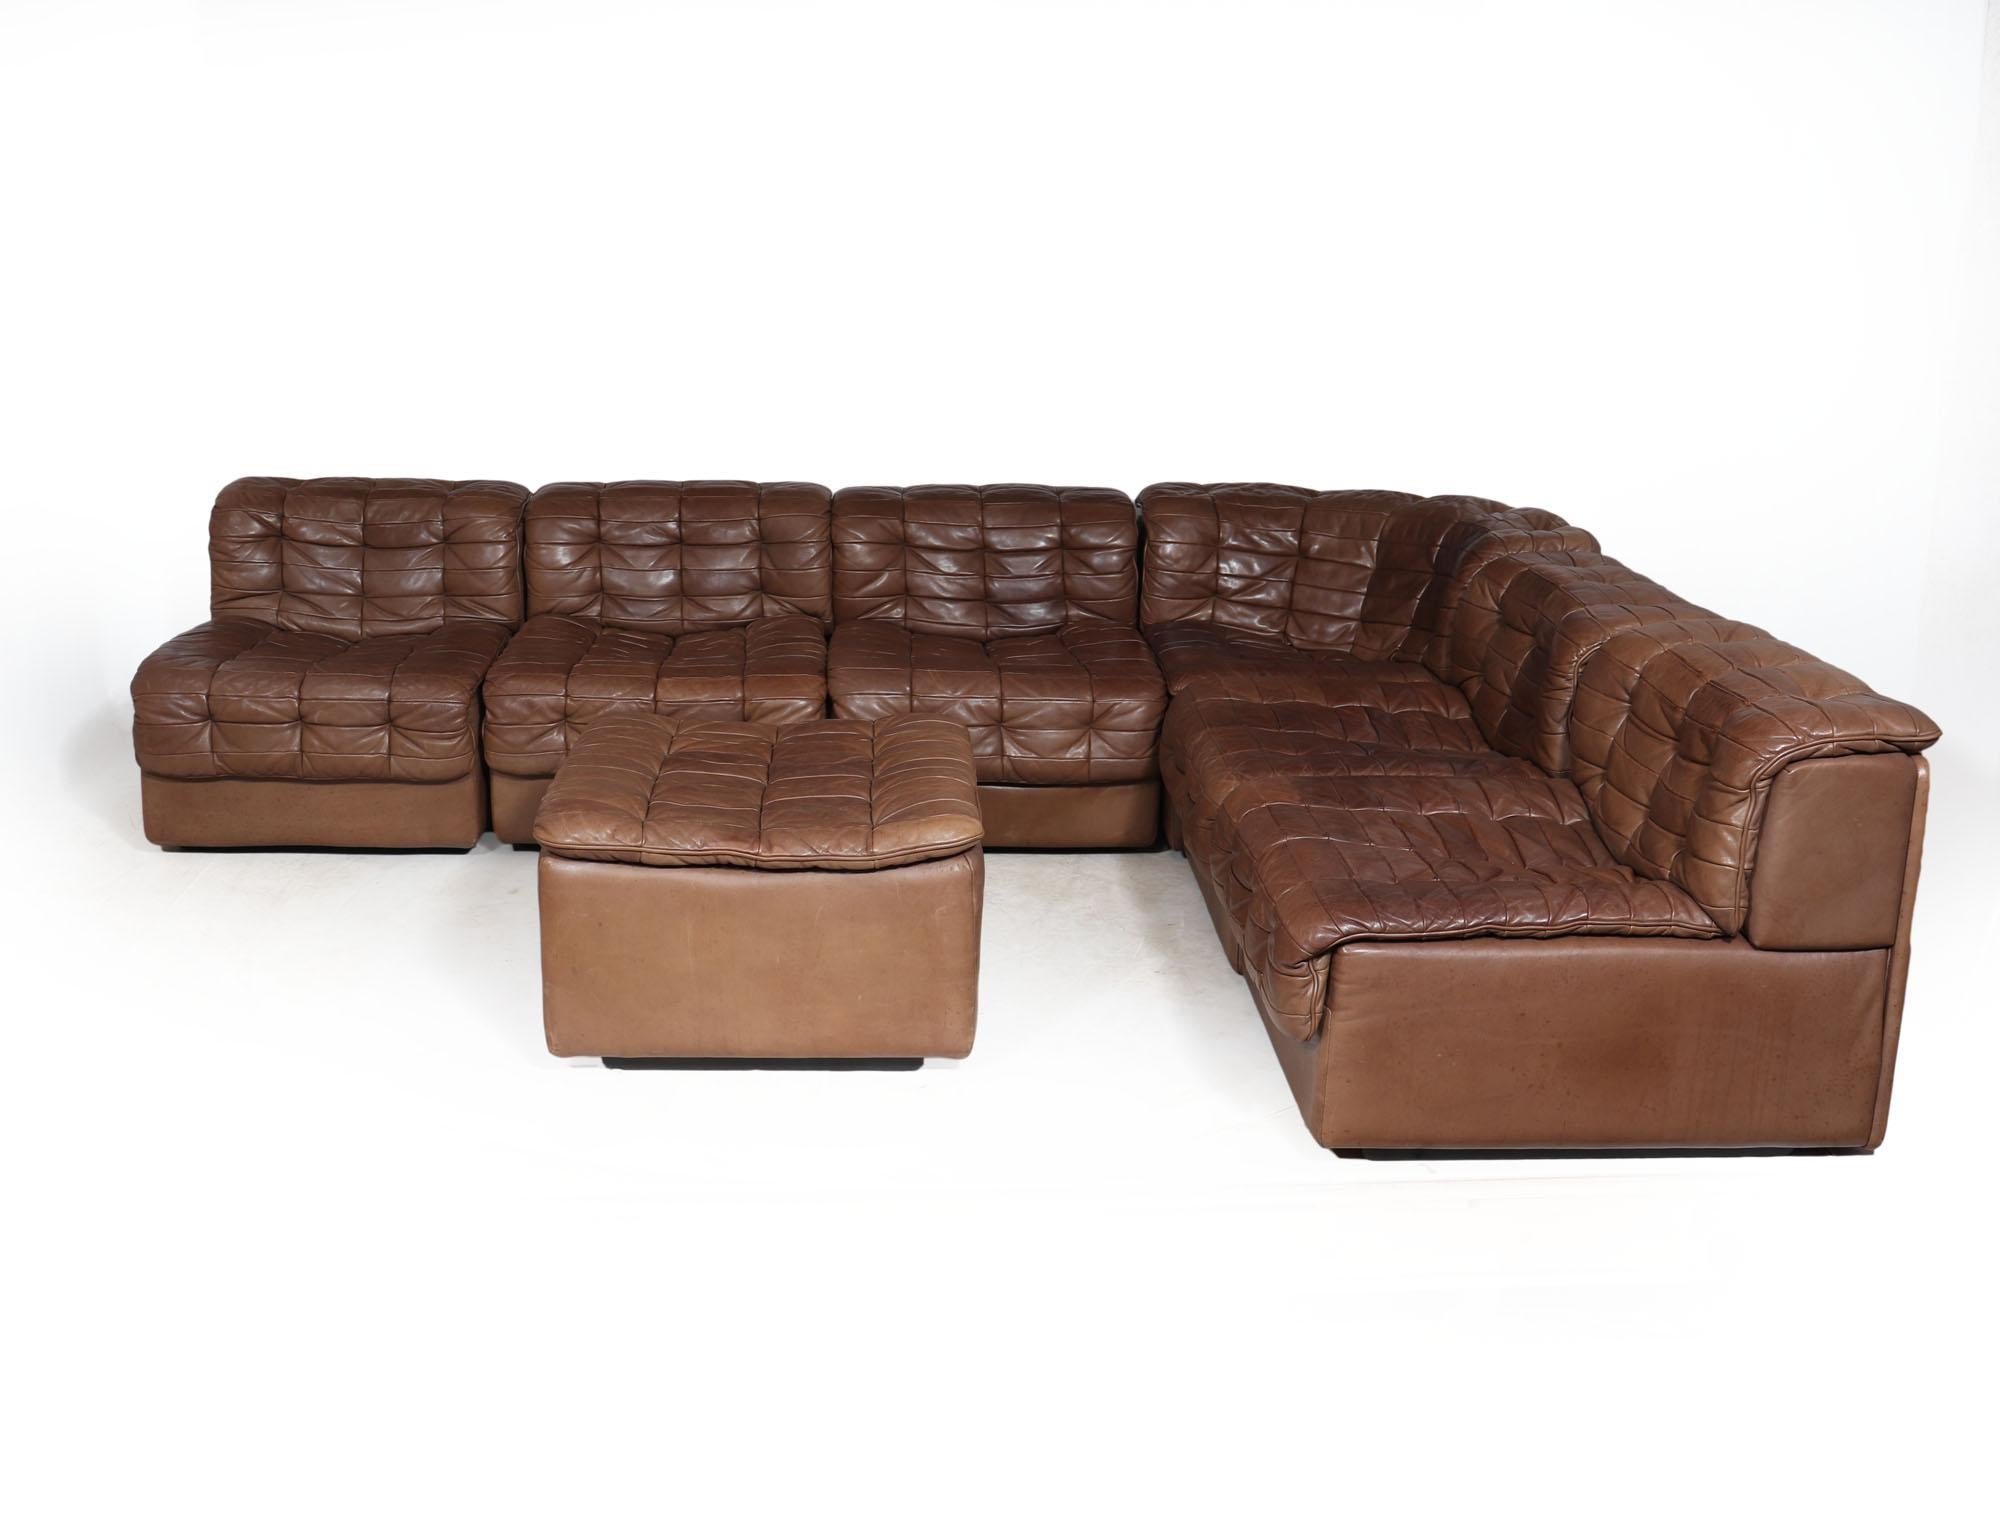 DS11 MODULAR SOFA  BY DE SEDE
A six section Modular corner sofa produced in patchwork leather in the 1970’s by renowned sofa manufacturers De Sede. It consists of one corner element, five seating elements and a footstool in tan leather with lovely